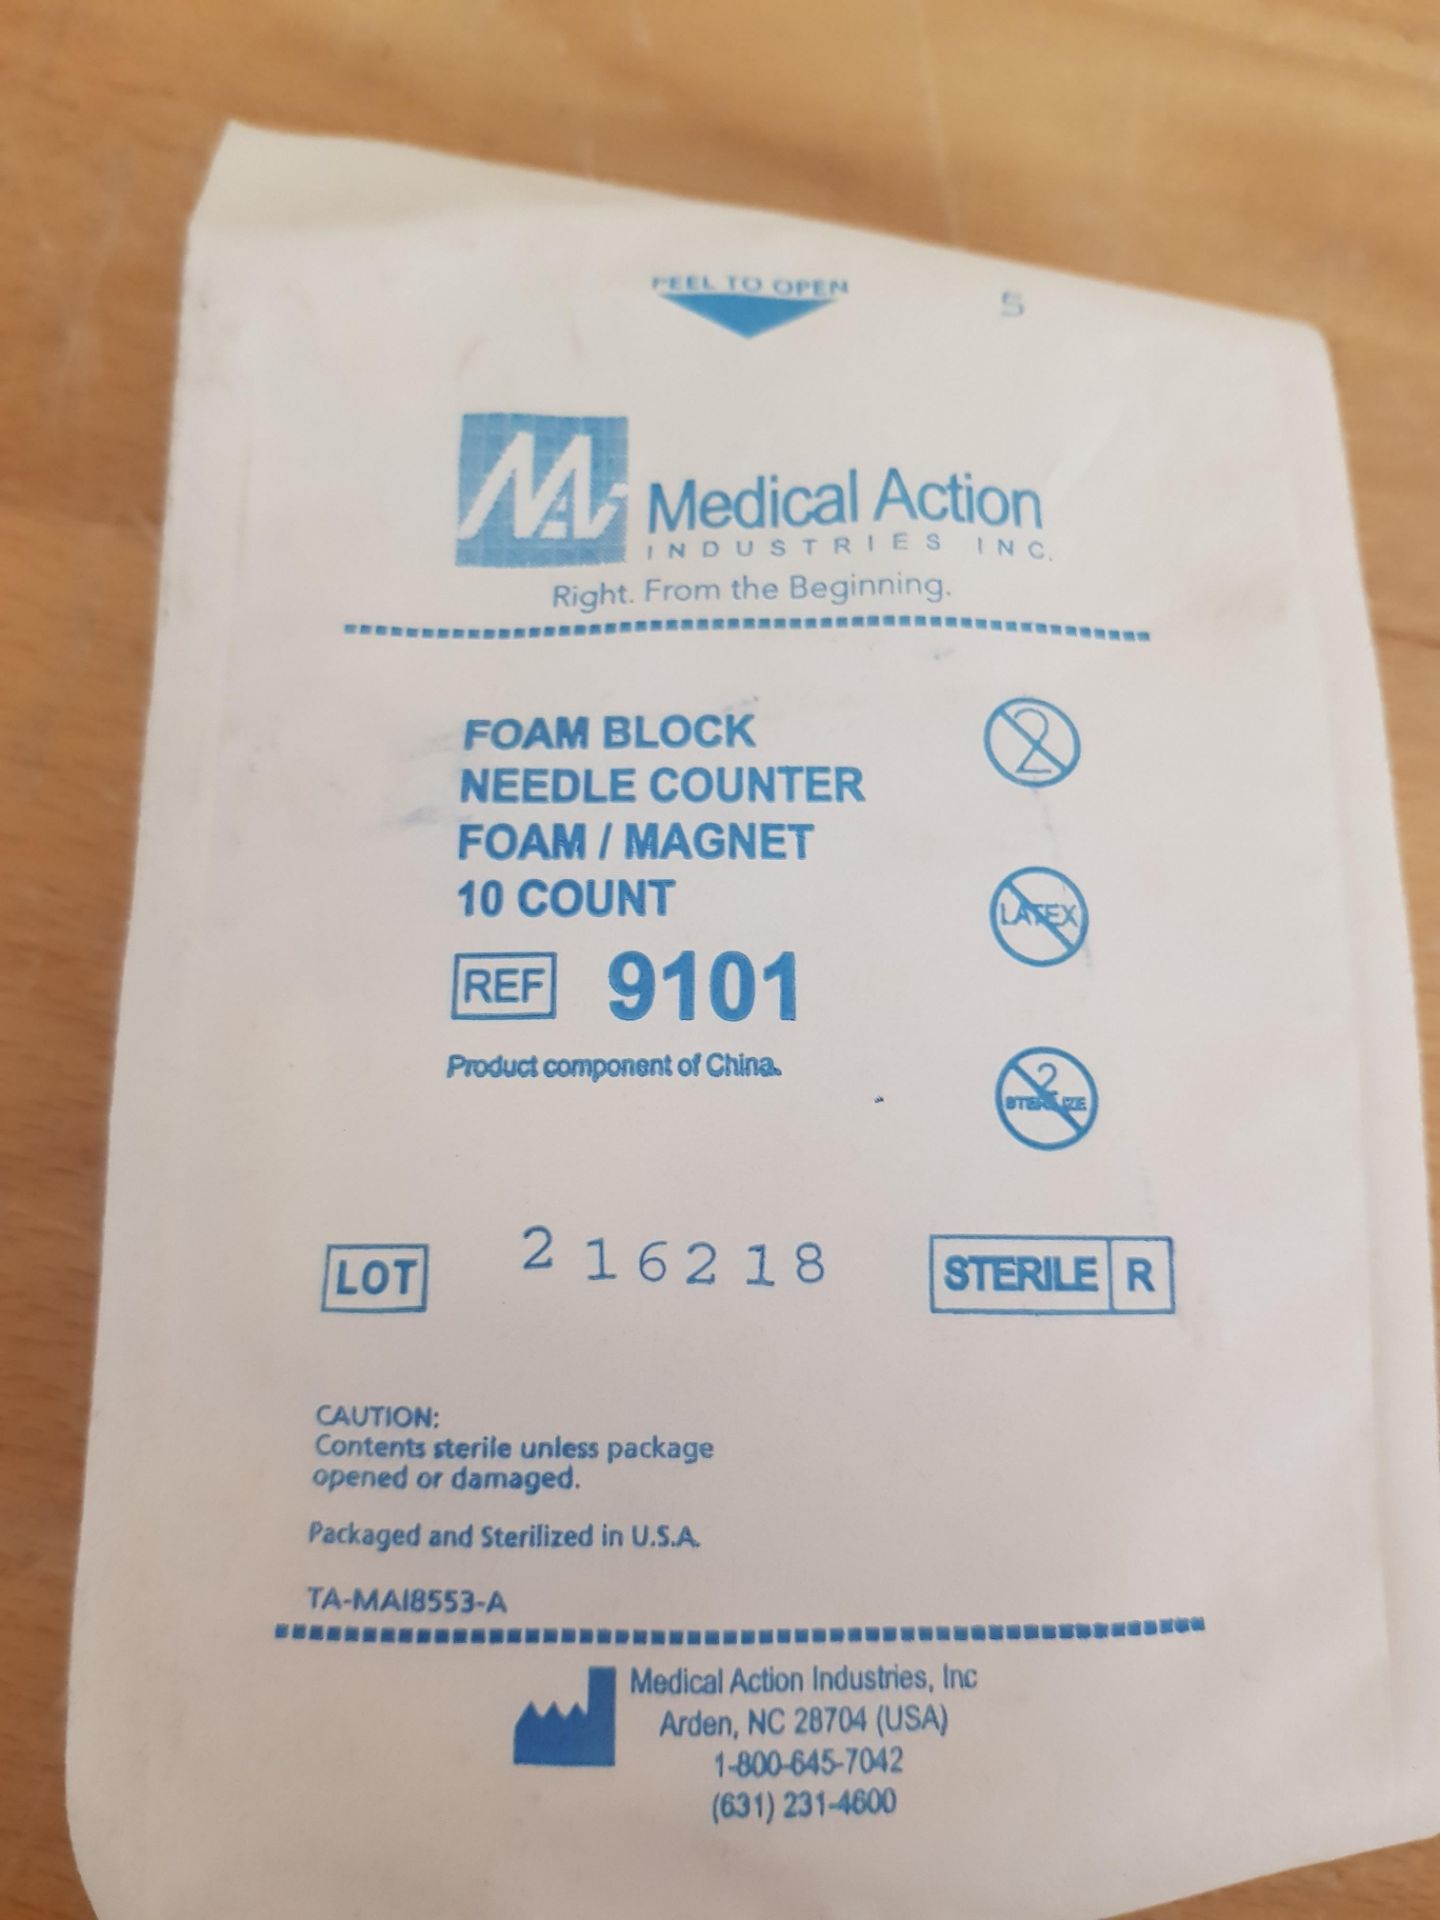 36 NEW MEDICAL ACTION FOAM BLOCK NEEDLE COUNTERS